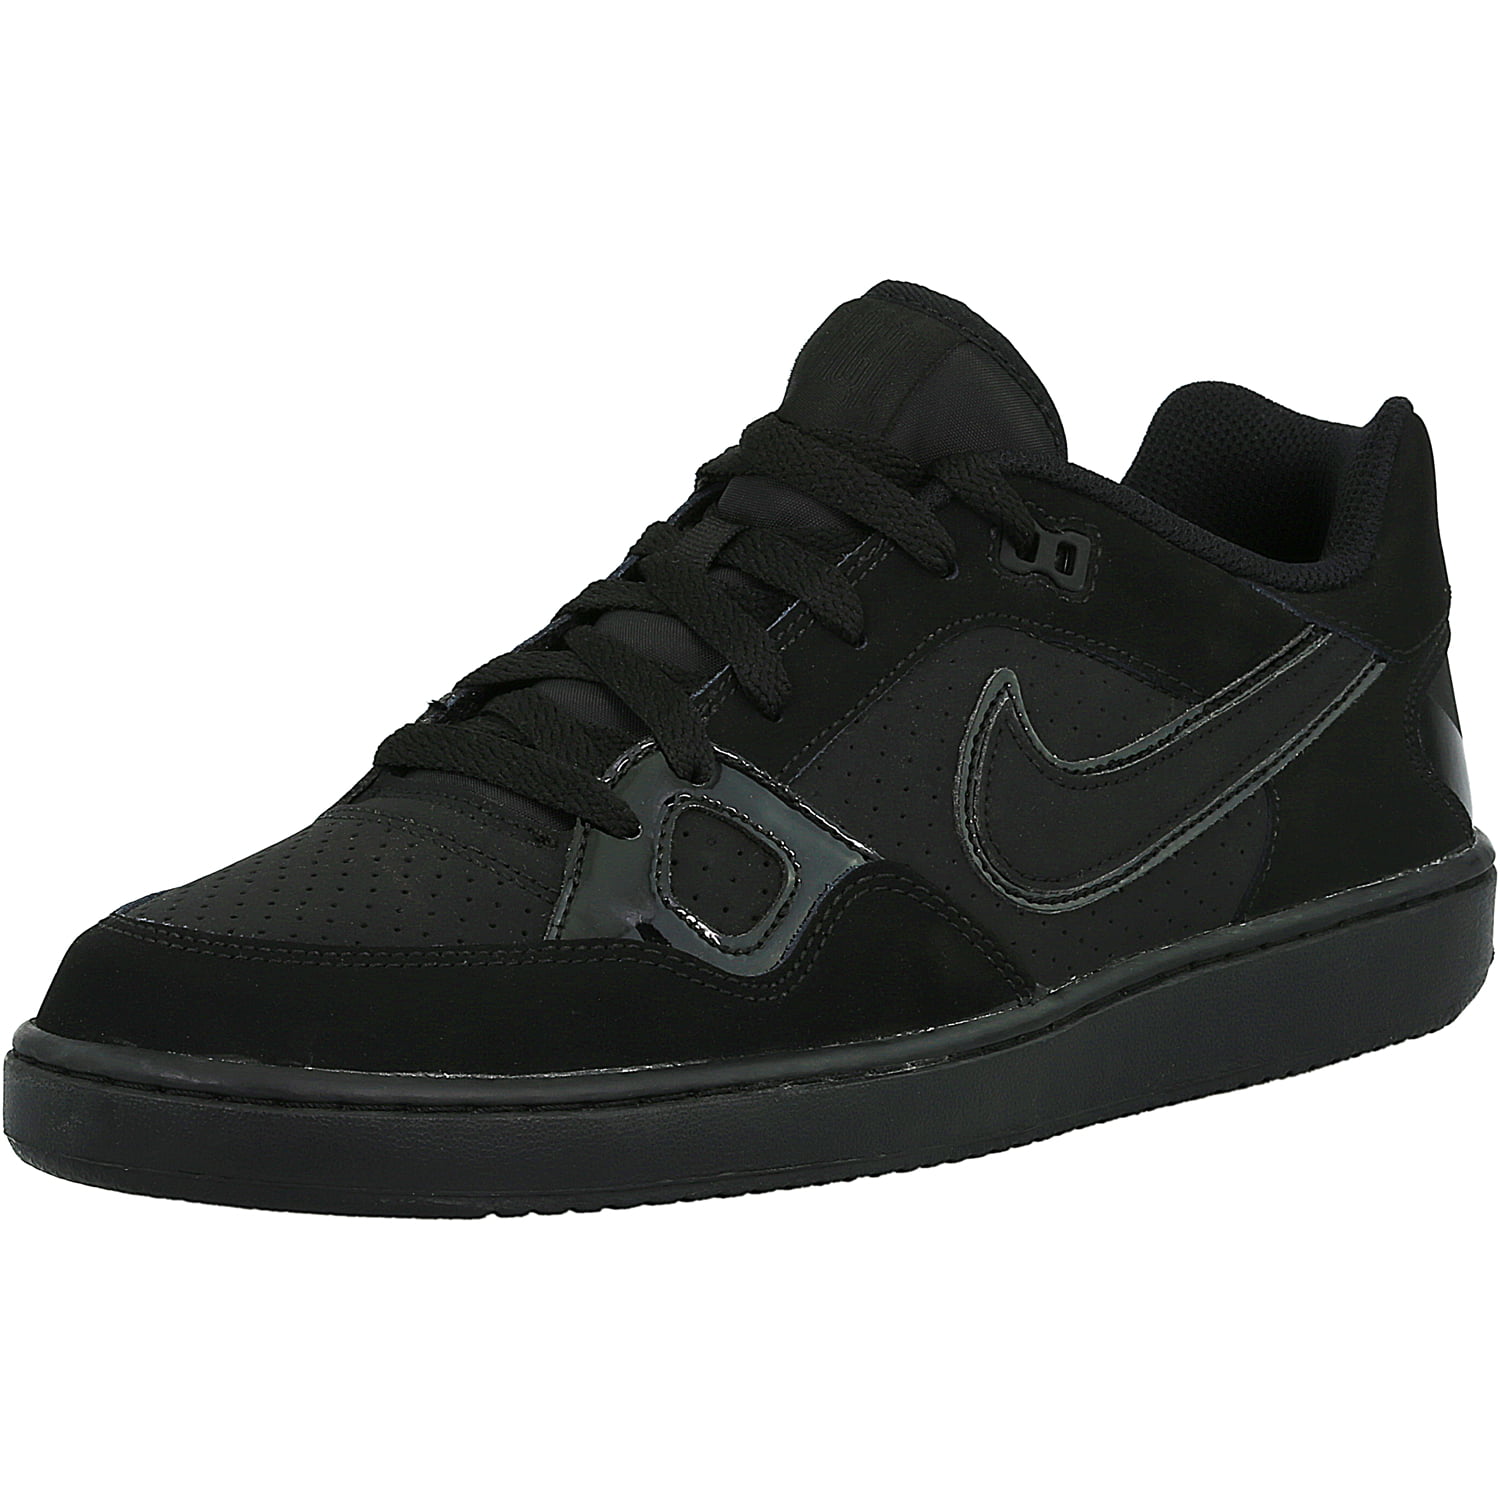 Nike Men's Son Force 005 Ankle-High Leather Cross Trainer Shoe - 13M Walmart.com